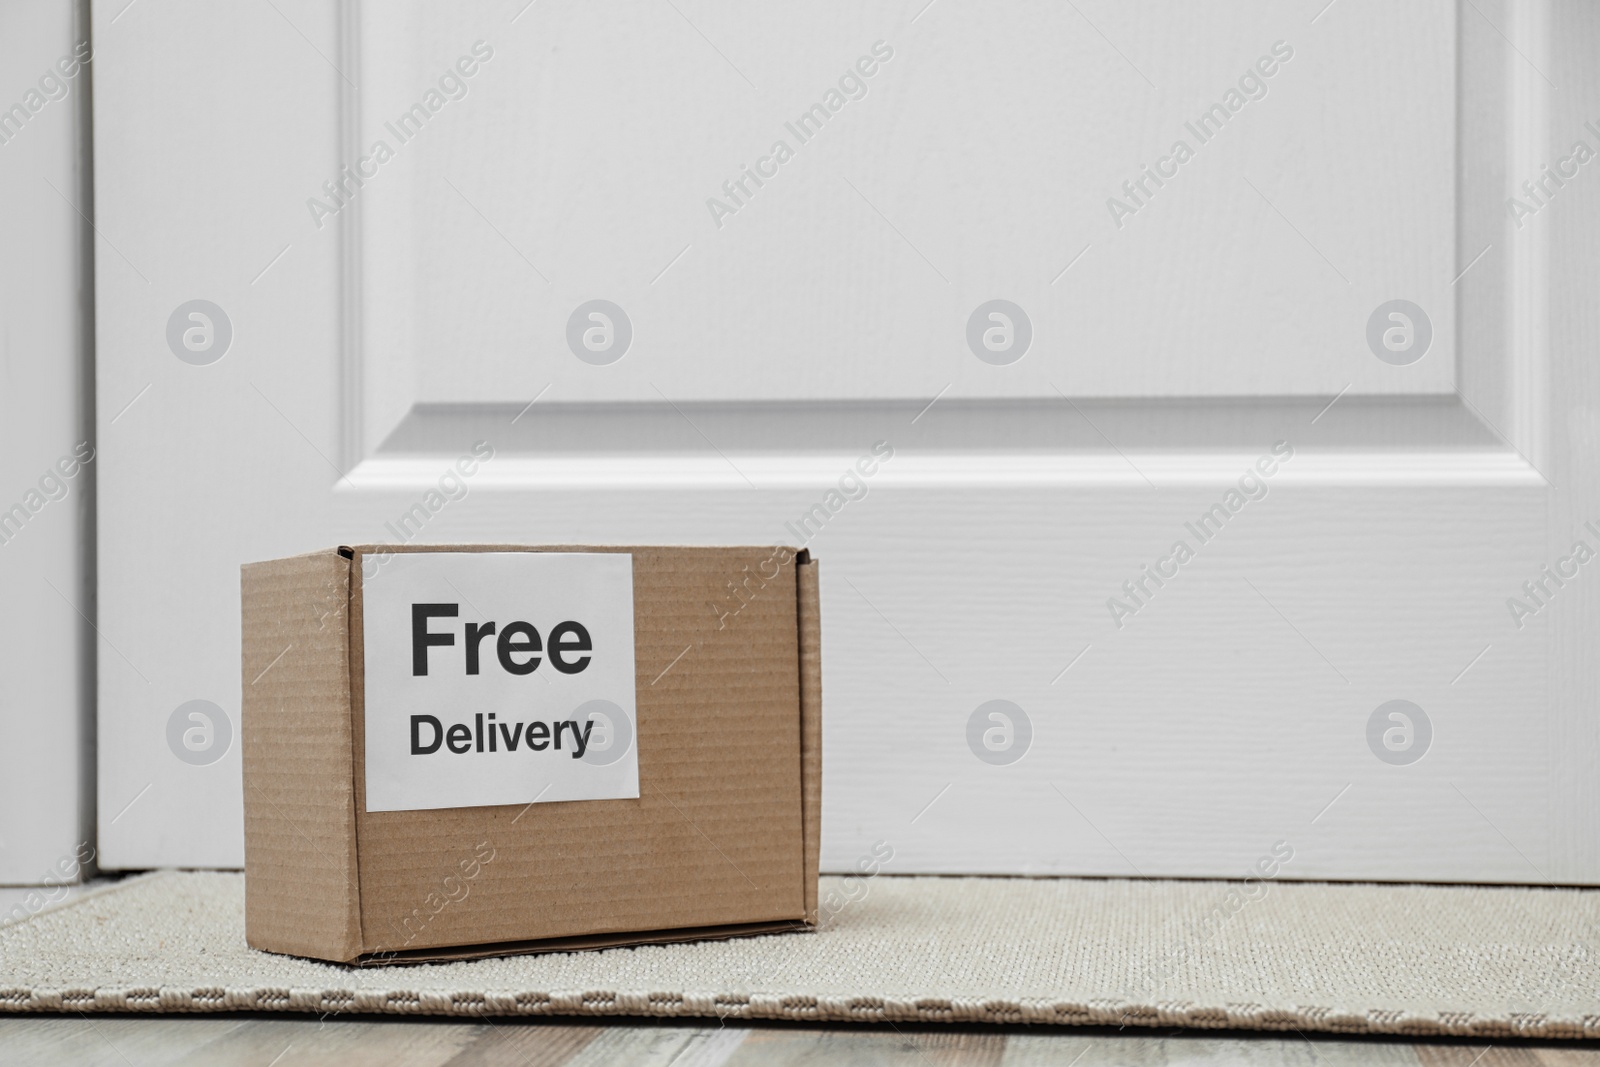 Photo of Parcel with sticker Free Delivery on rug indoors, space for text. Courier service